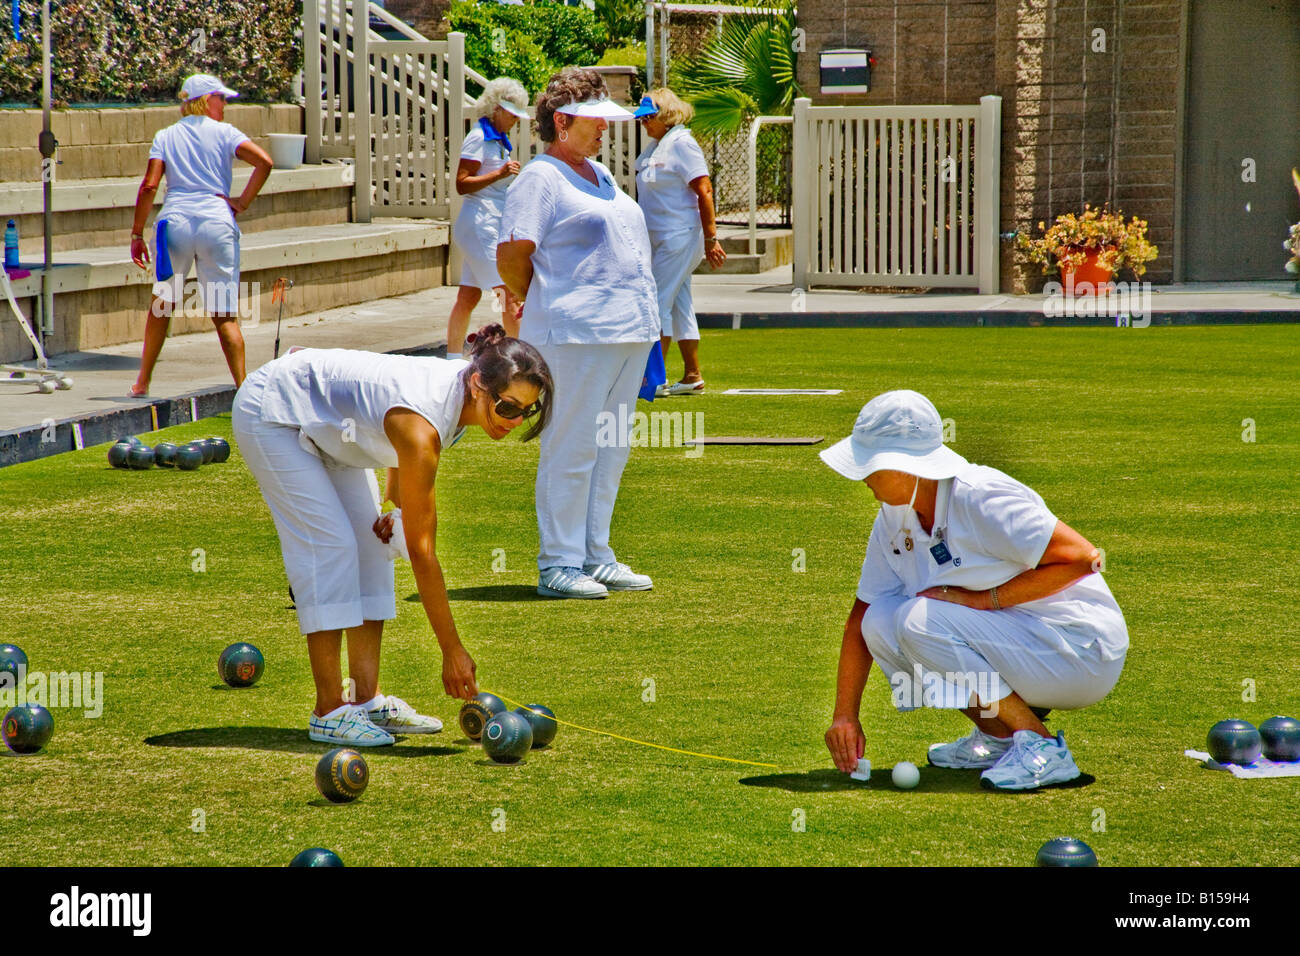 Wearing the regulation white uniforms two woman players measure the distance between two lawn bowling balls at competition Stock Photo